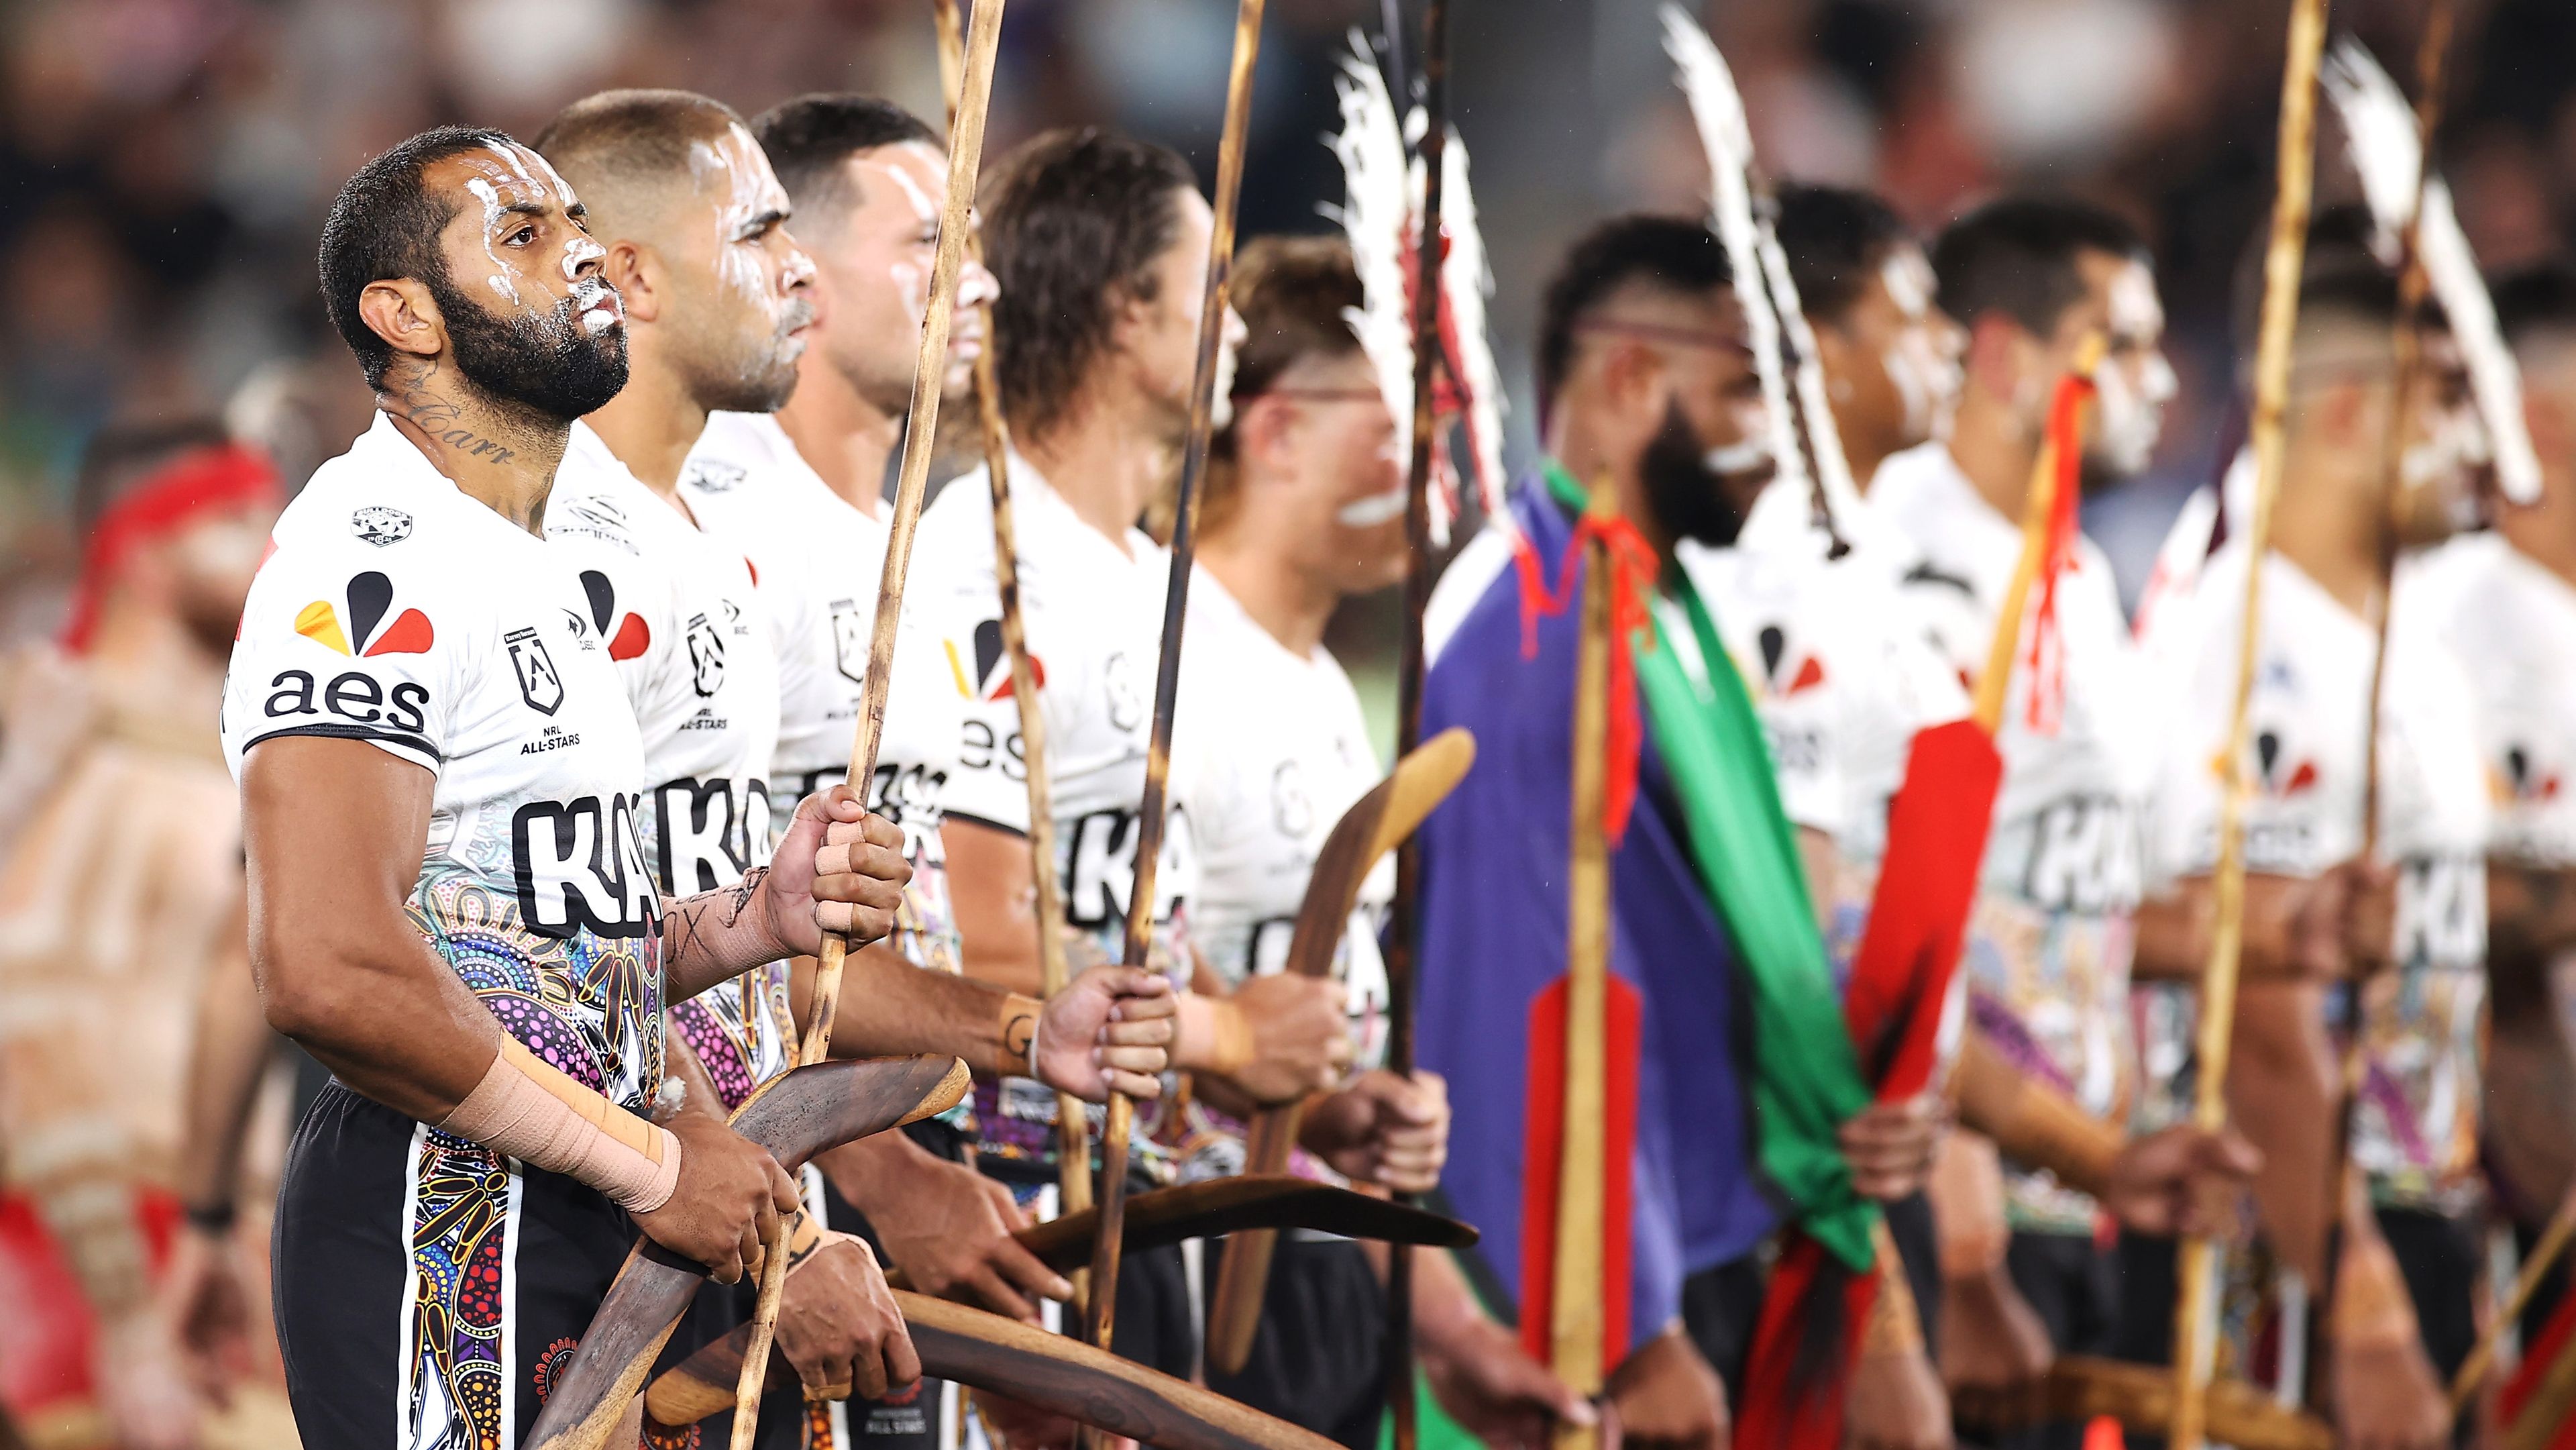 Josh Addo-Carr of the Indigenous All Stars looks on during the pre-game ceremony ahead of the match between the Men&#x27;s Indigenous All Stars and the Men&#x27;s Maori All Stars at CommBank Stadium on February 12, 2022 in Sydney, Australia. (Photo by Mark Kolbe/Getty Images)